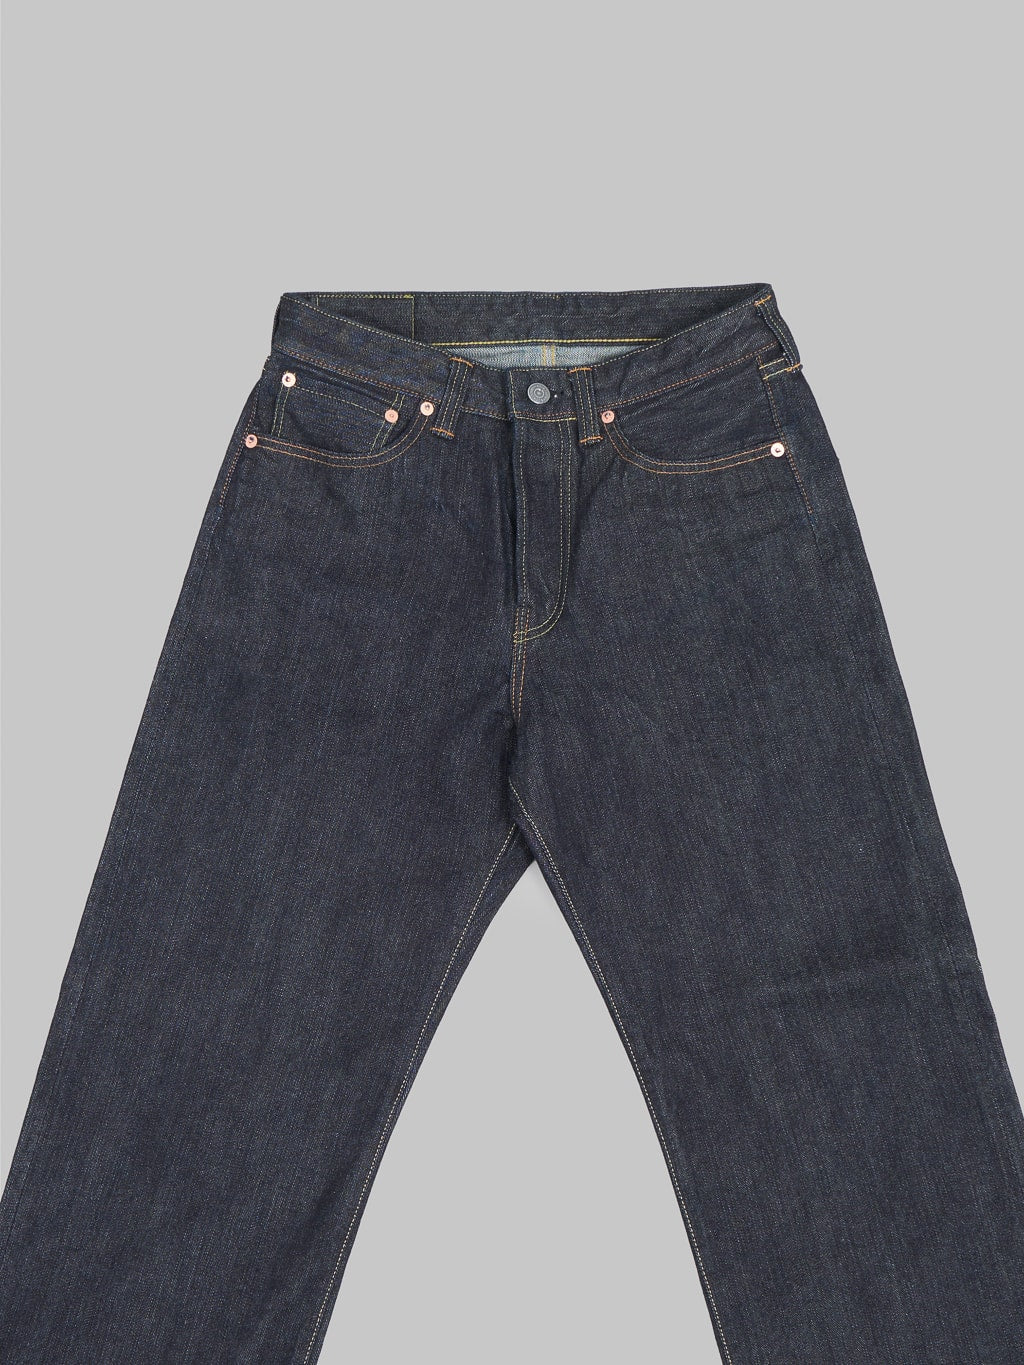 The Flat Head FN-D111 14.5oz Wide Straight Jeans